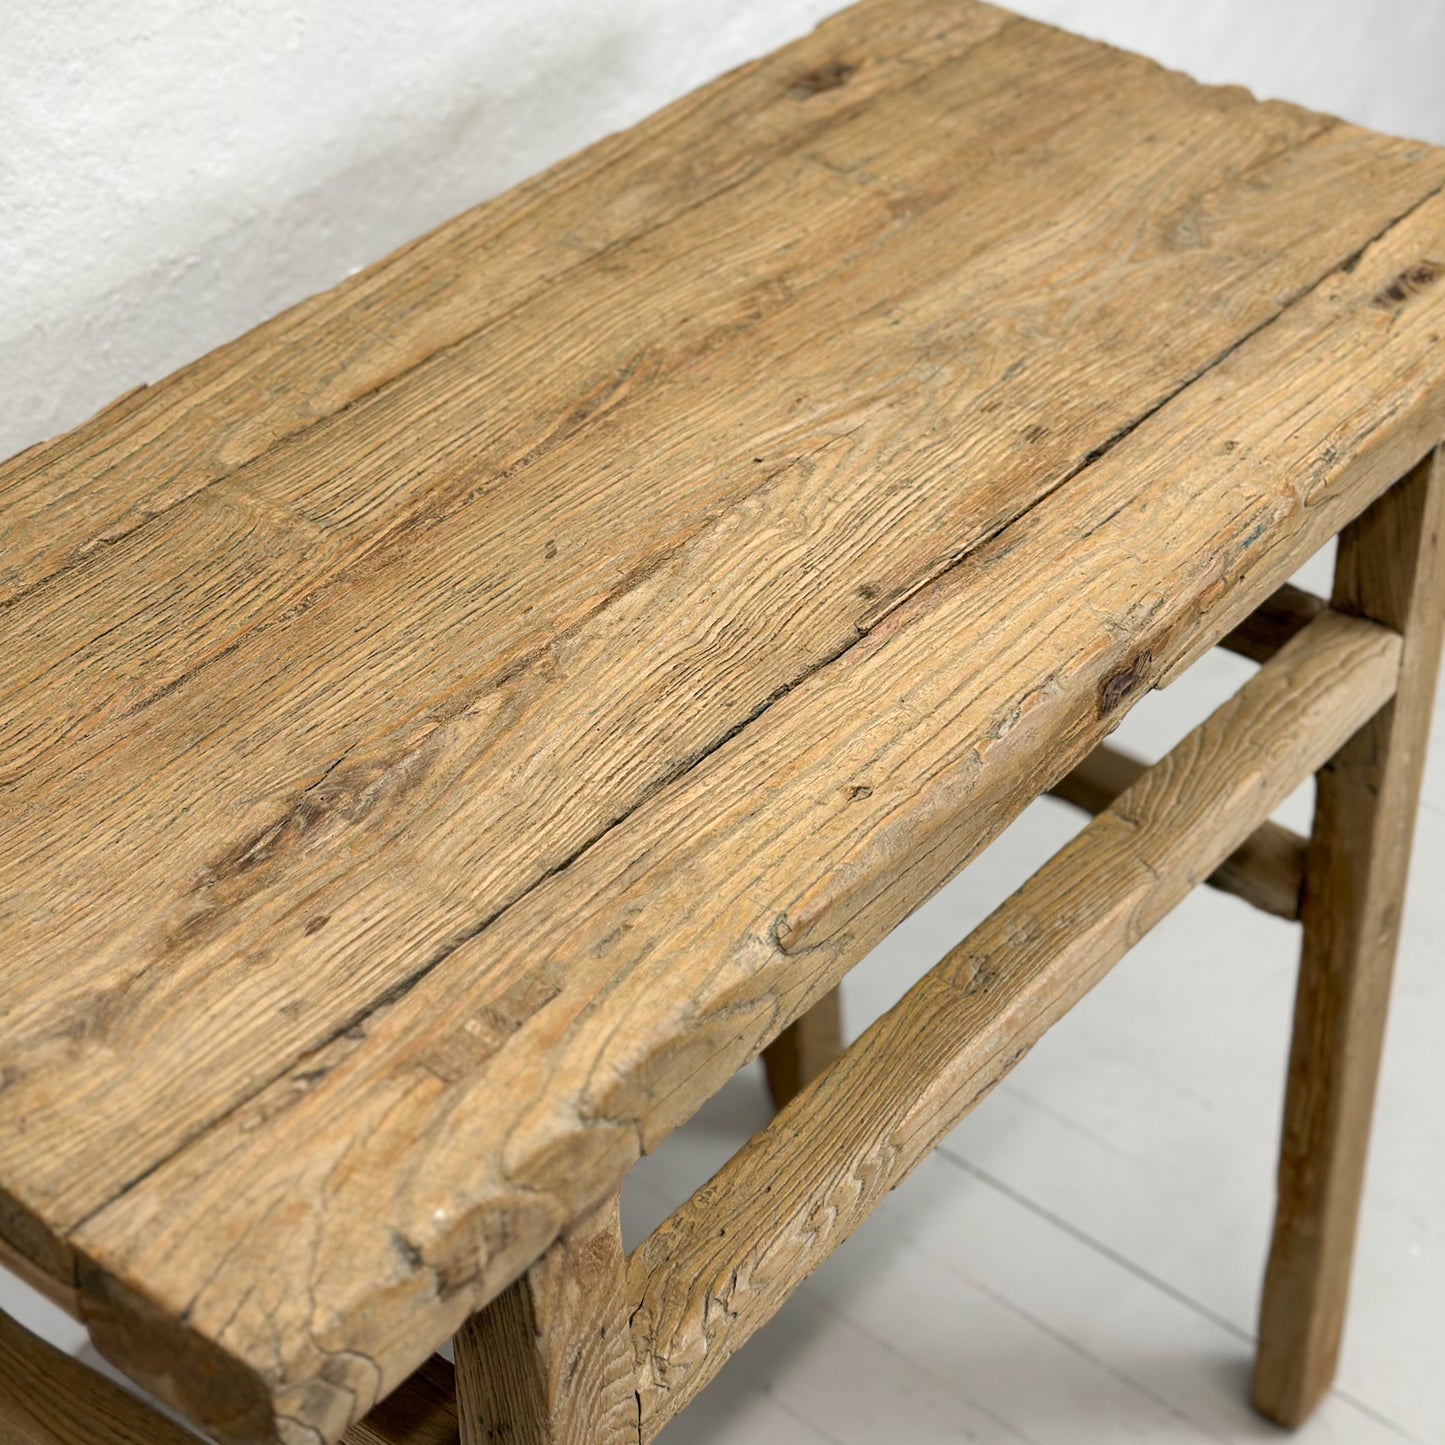 Simple Bleached Elm Console Table